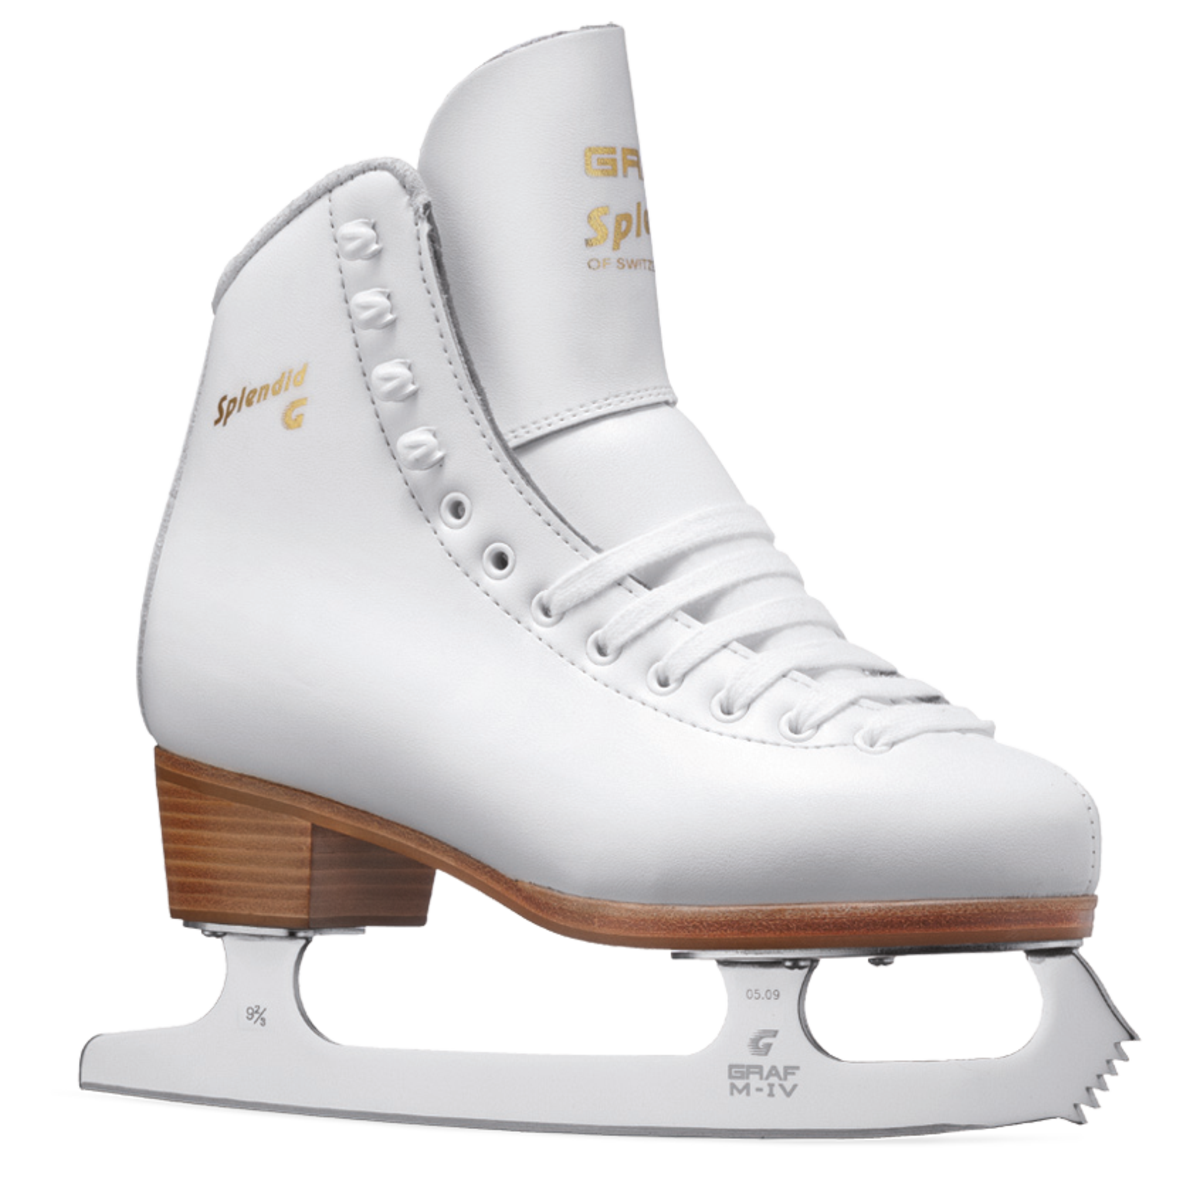 White Ice Skating Shoes Download PNG Image